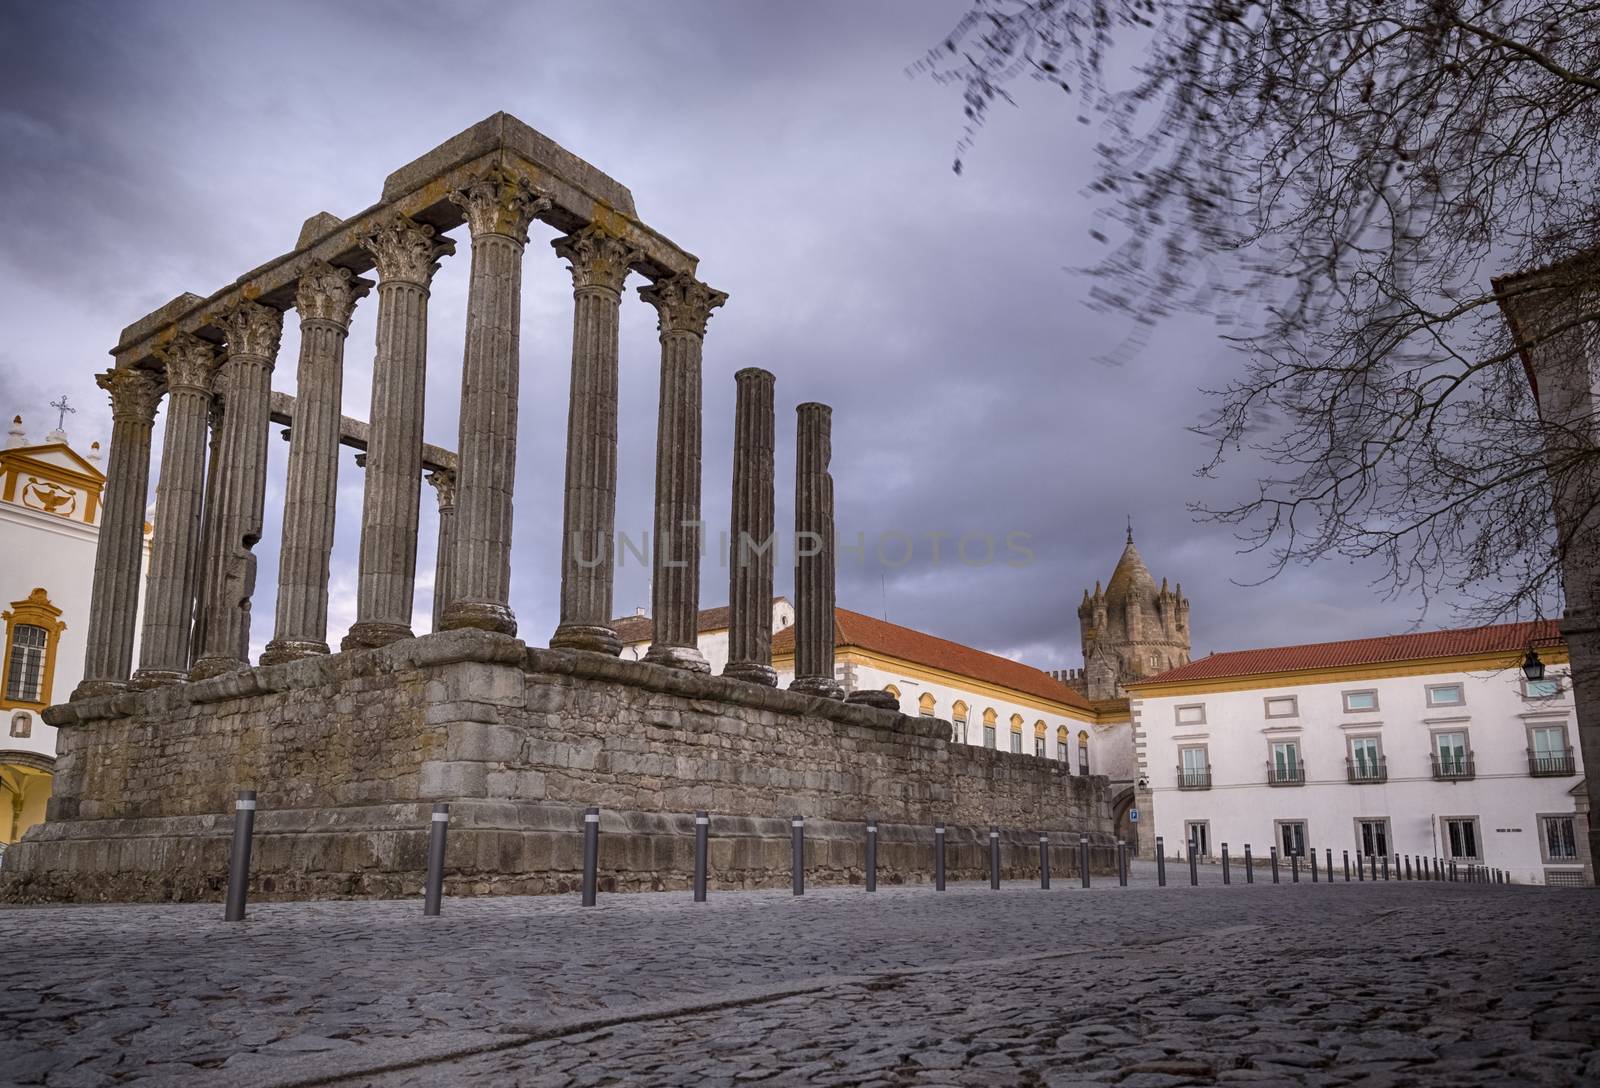 The 'Temple of Diana' in the UNESCO World Heritage Site of the City of Evora, Portugal, Europe.